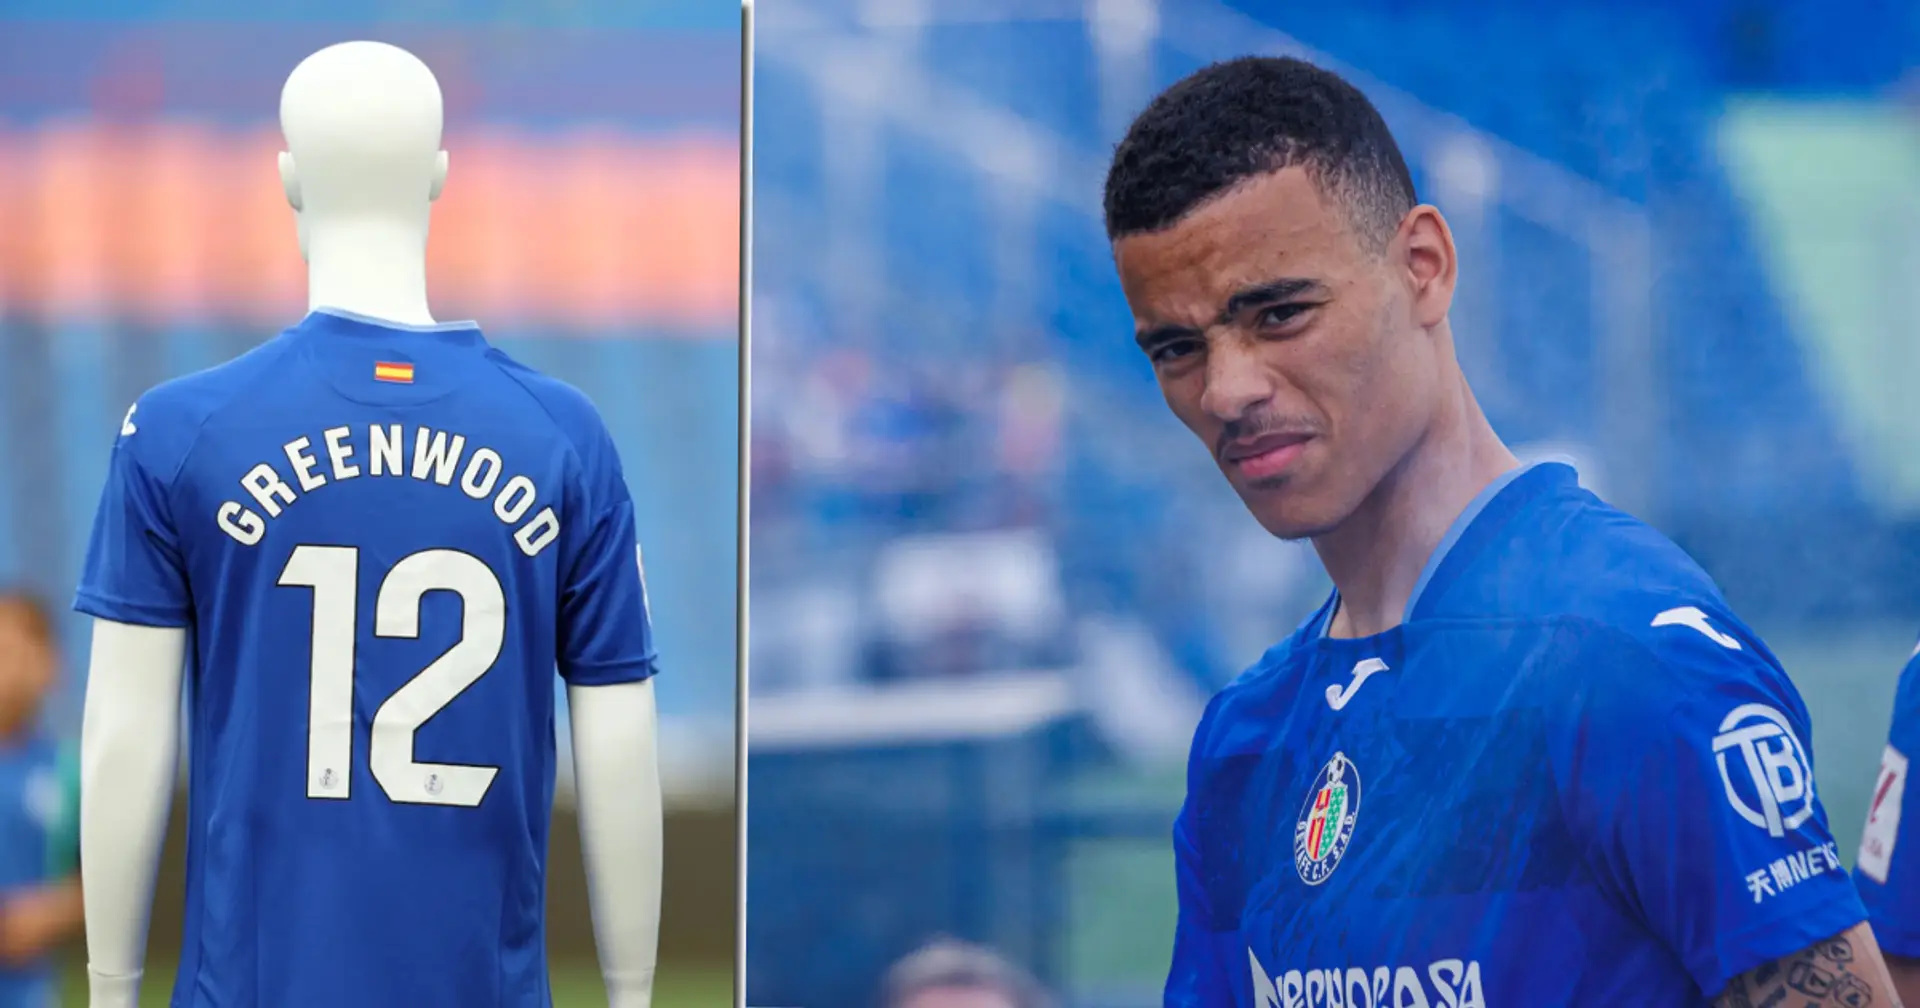 Mason Greenwood's shirt becomes best selling Getafe shirt EVER in just one week